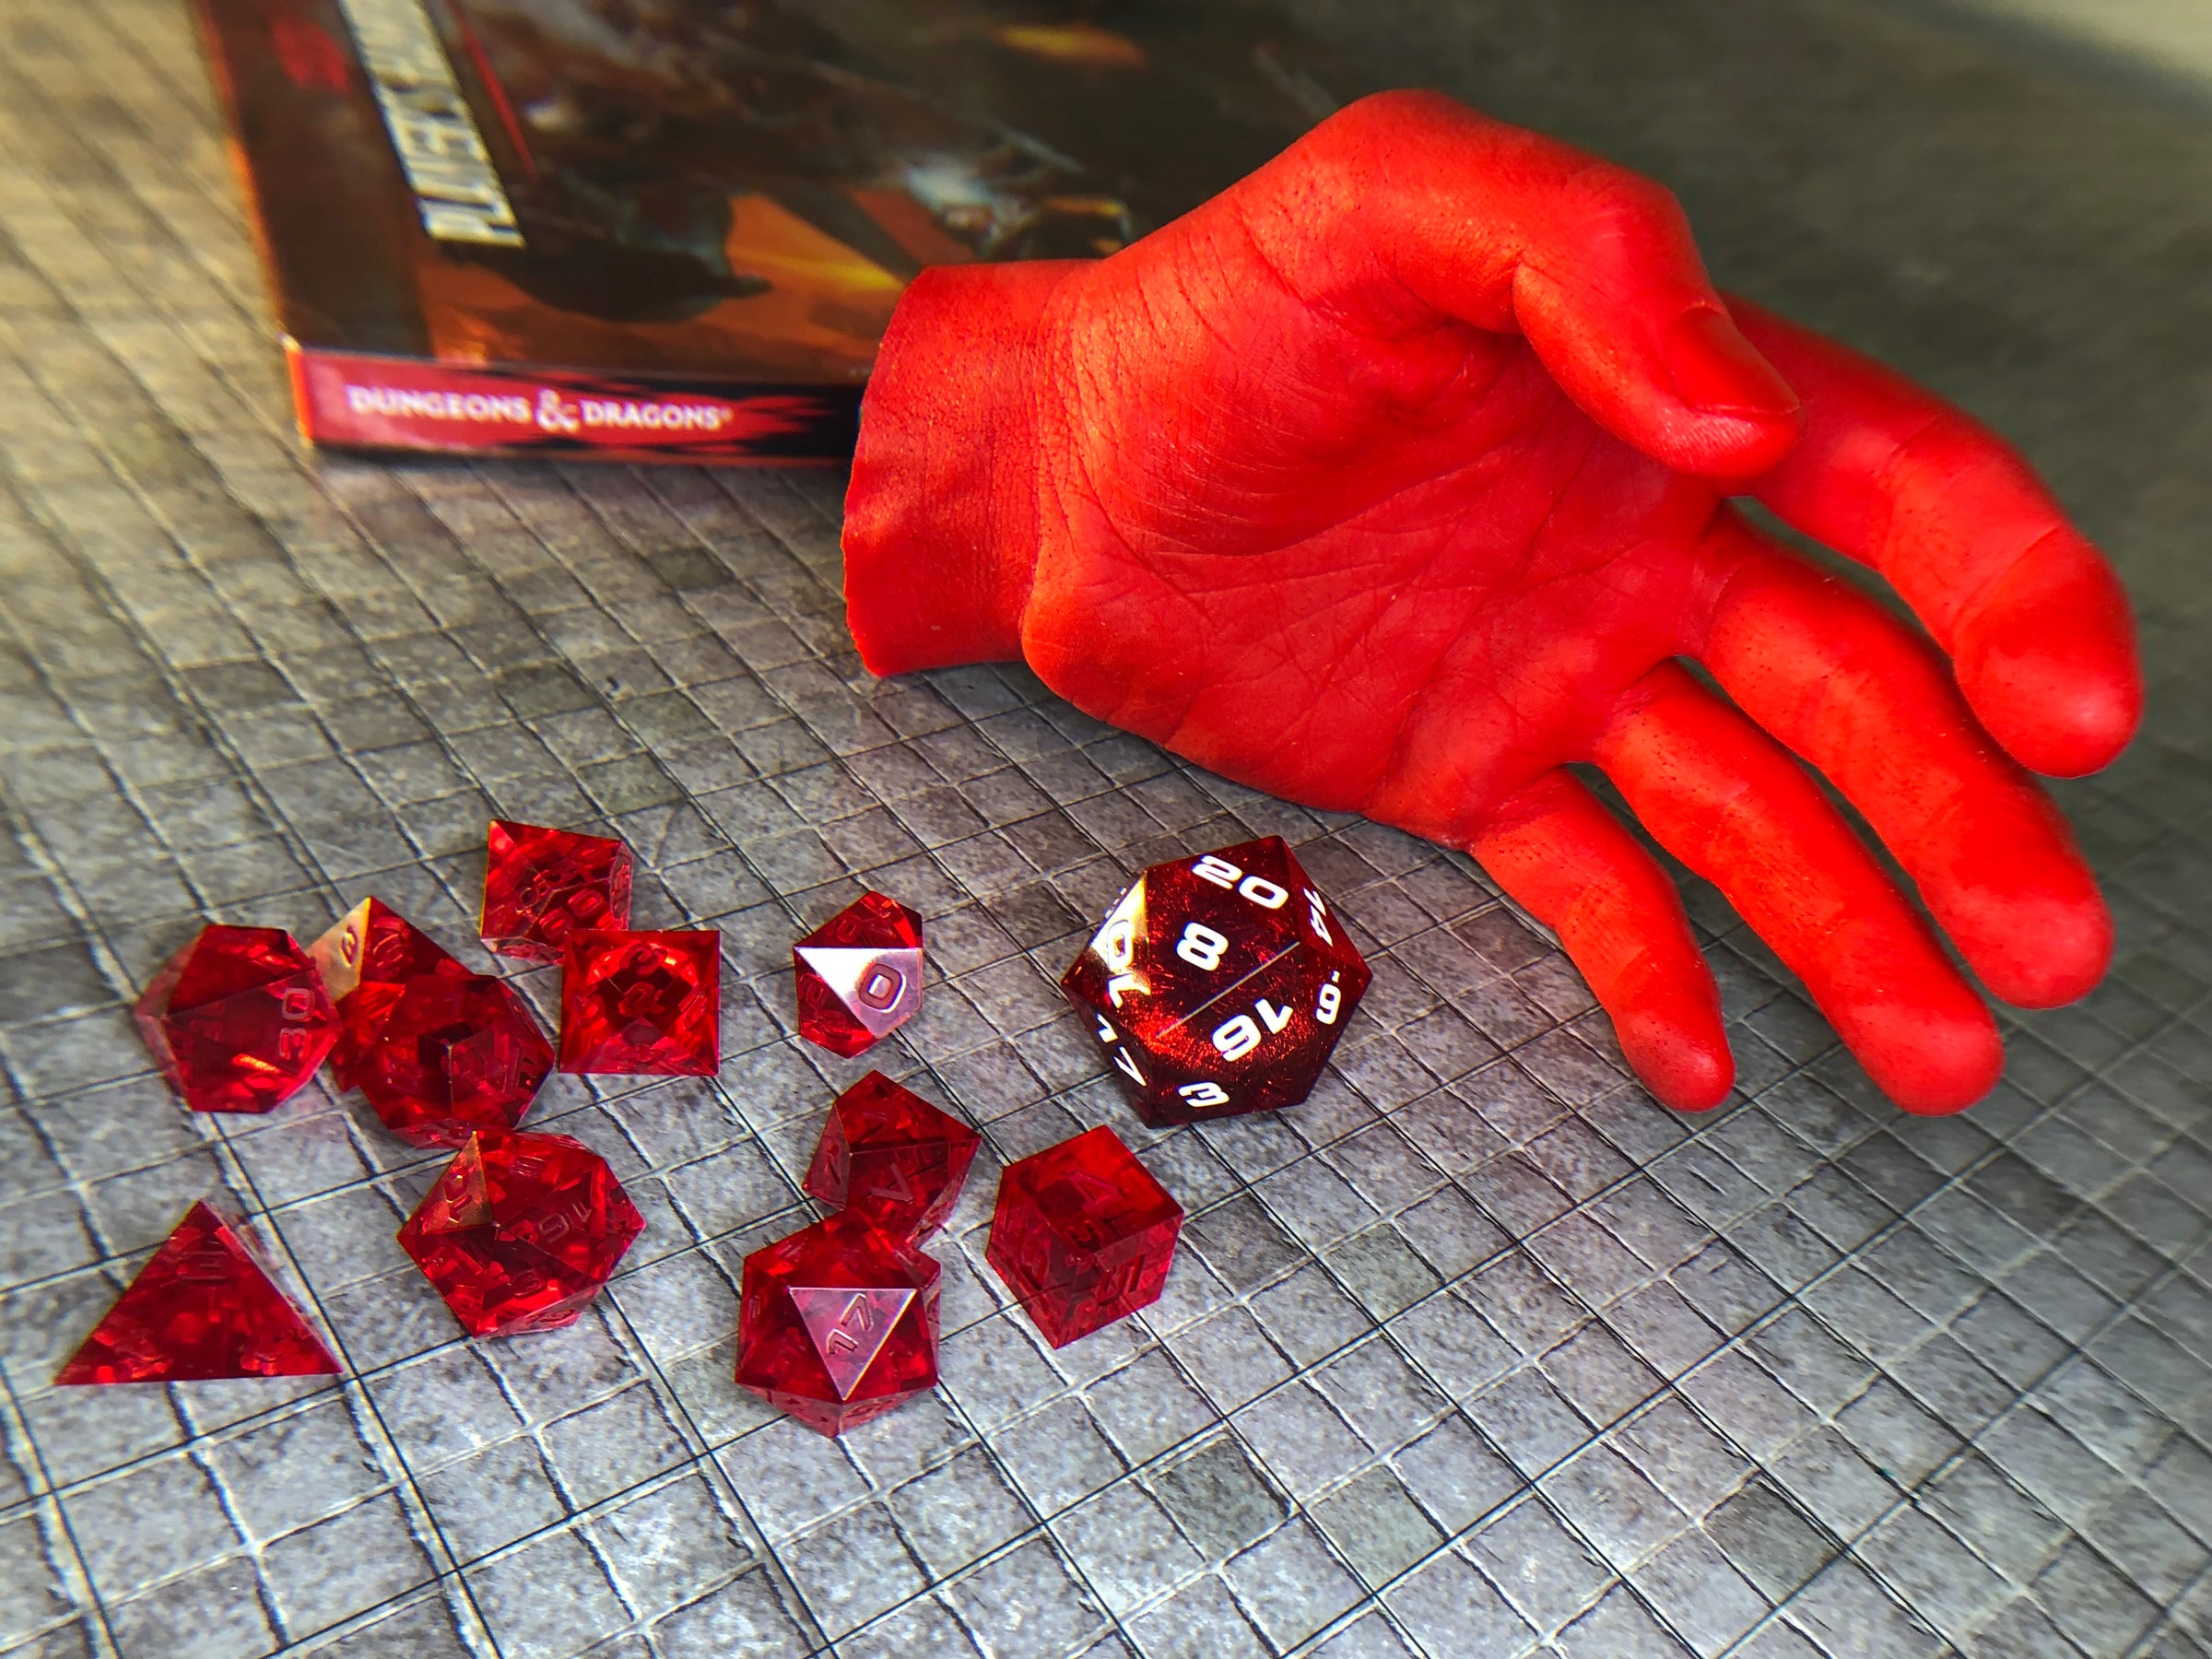 Red Aether Objects dice and red resin hand 